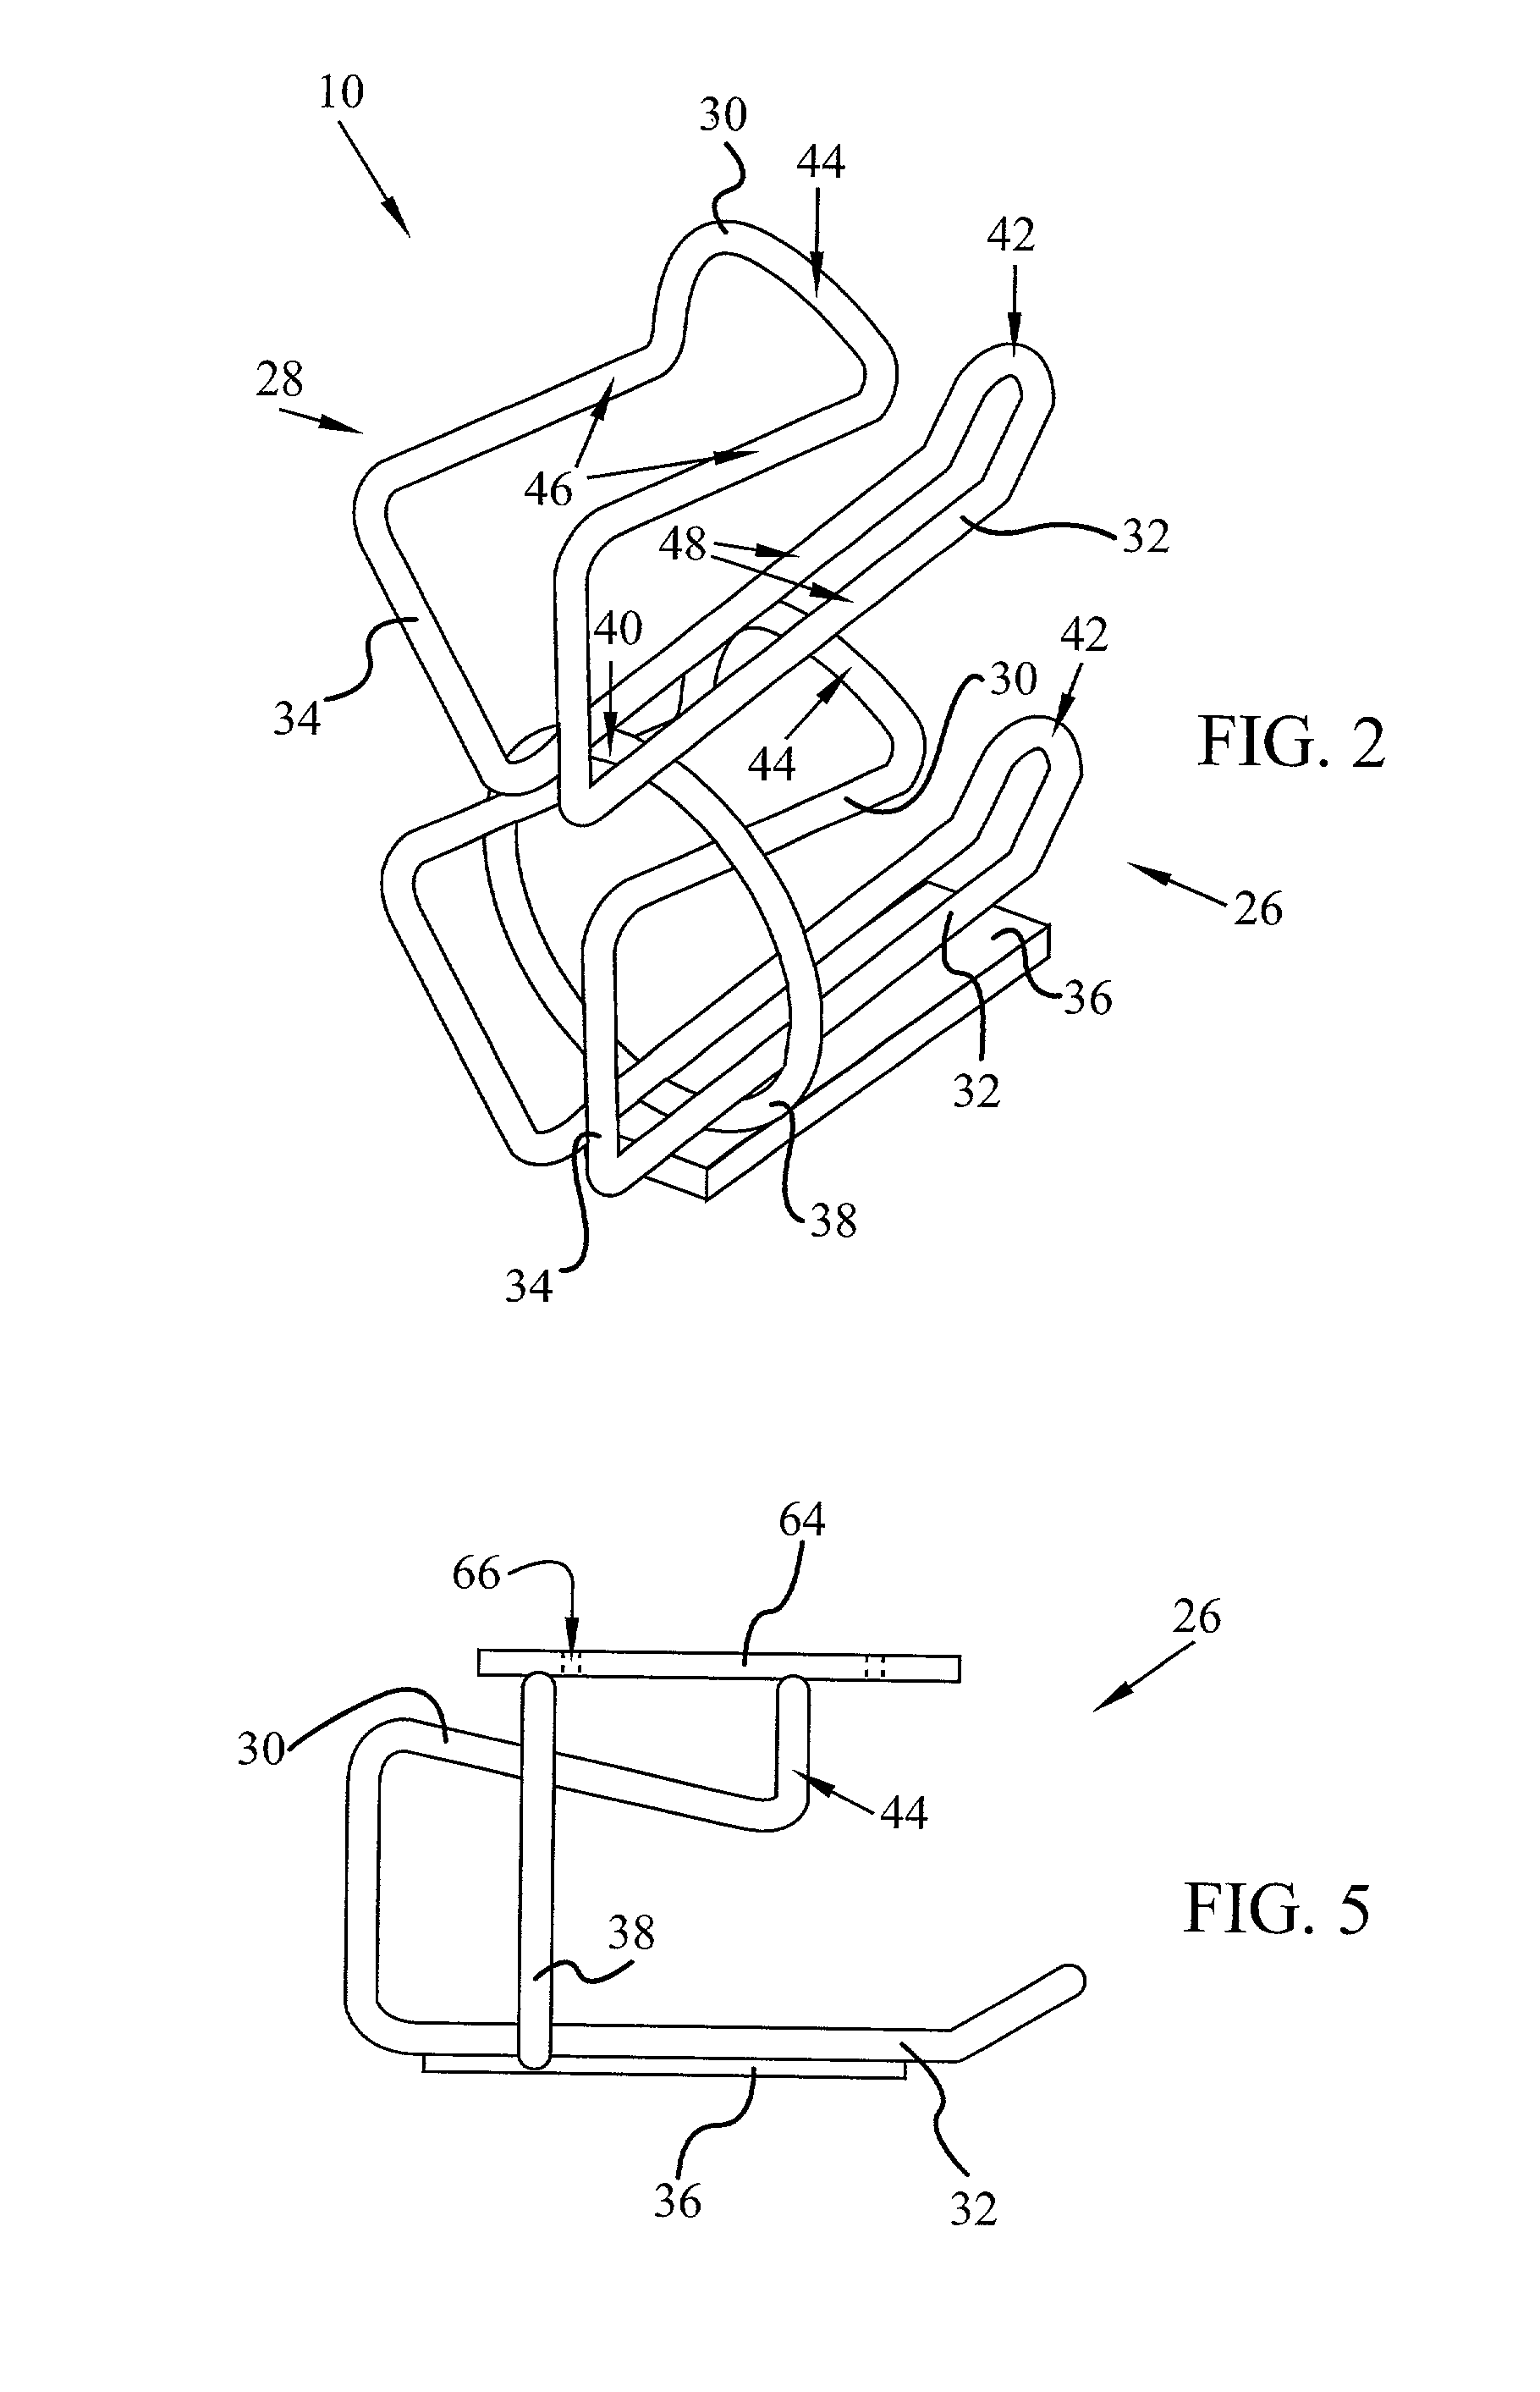 Bicycle-mounted accessory transport system